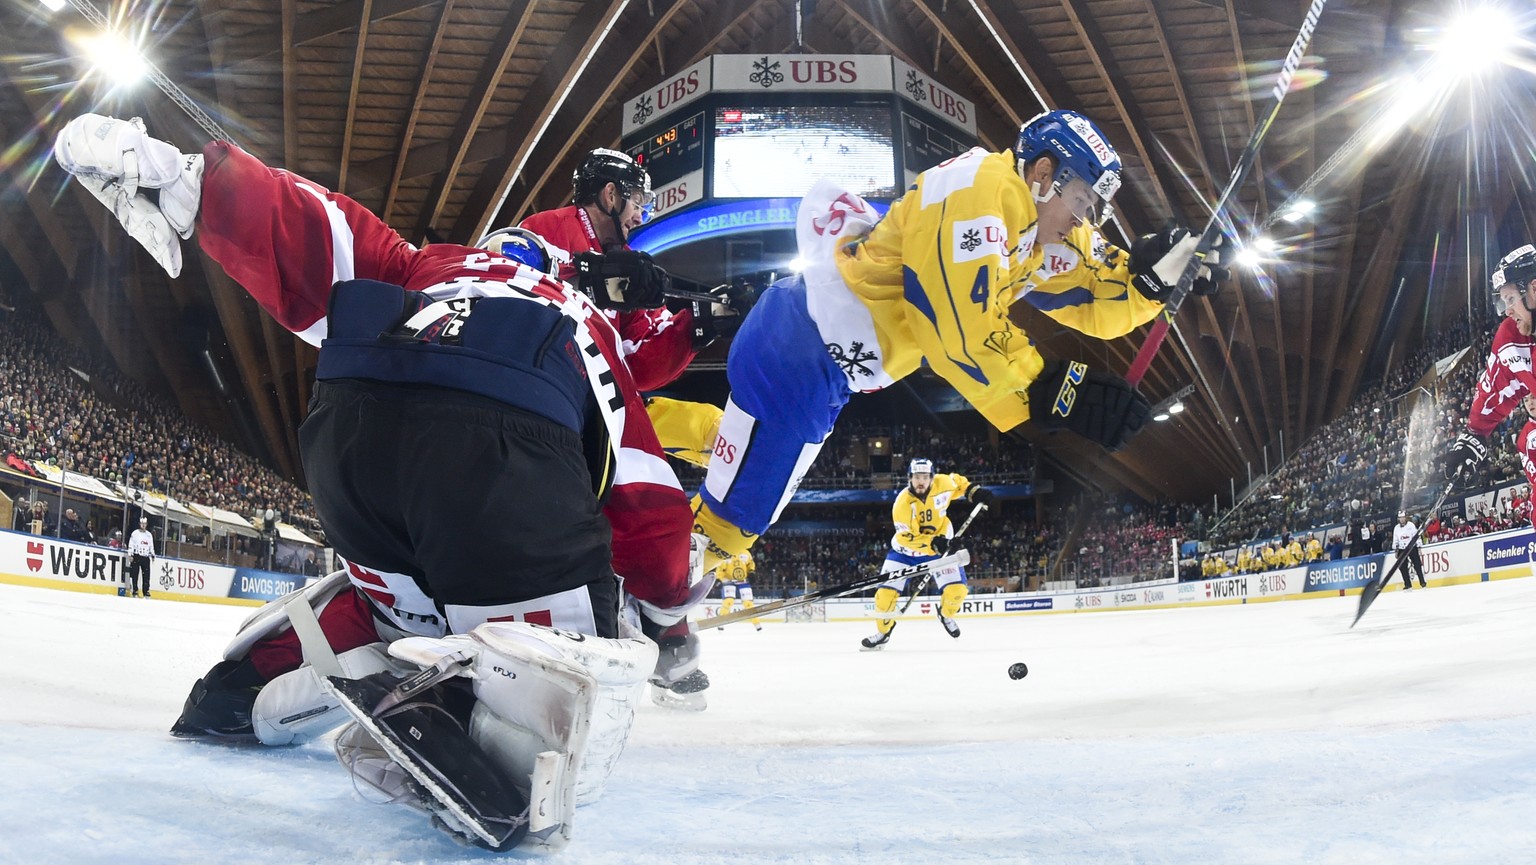 Davos&#039; Tomi Sallinen,right, fights for the puck with Team Canada&#039;s goalkeeper Kevin Poulin, during the game between Team Canada and HC Davos at the 91th Spengler Cup ice hockey tournament in ...